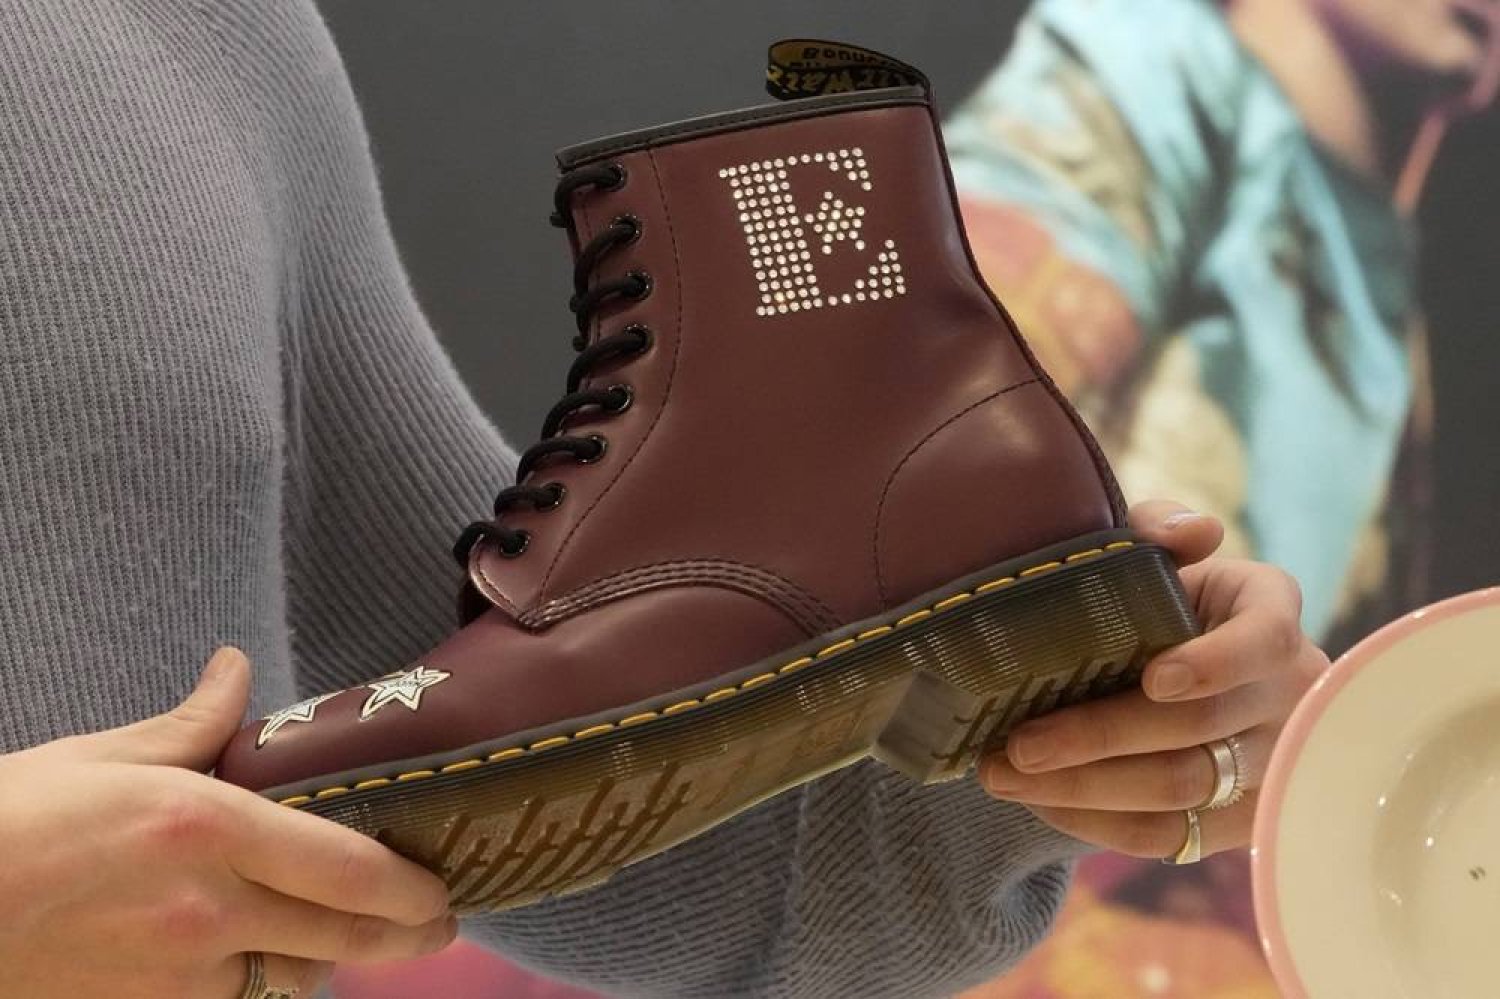 A Dr. Martens boot inspired by Elton John's famous Pinball Wizard outfit is shown at a promotional event in London, March 20, 2023. (AP)